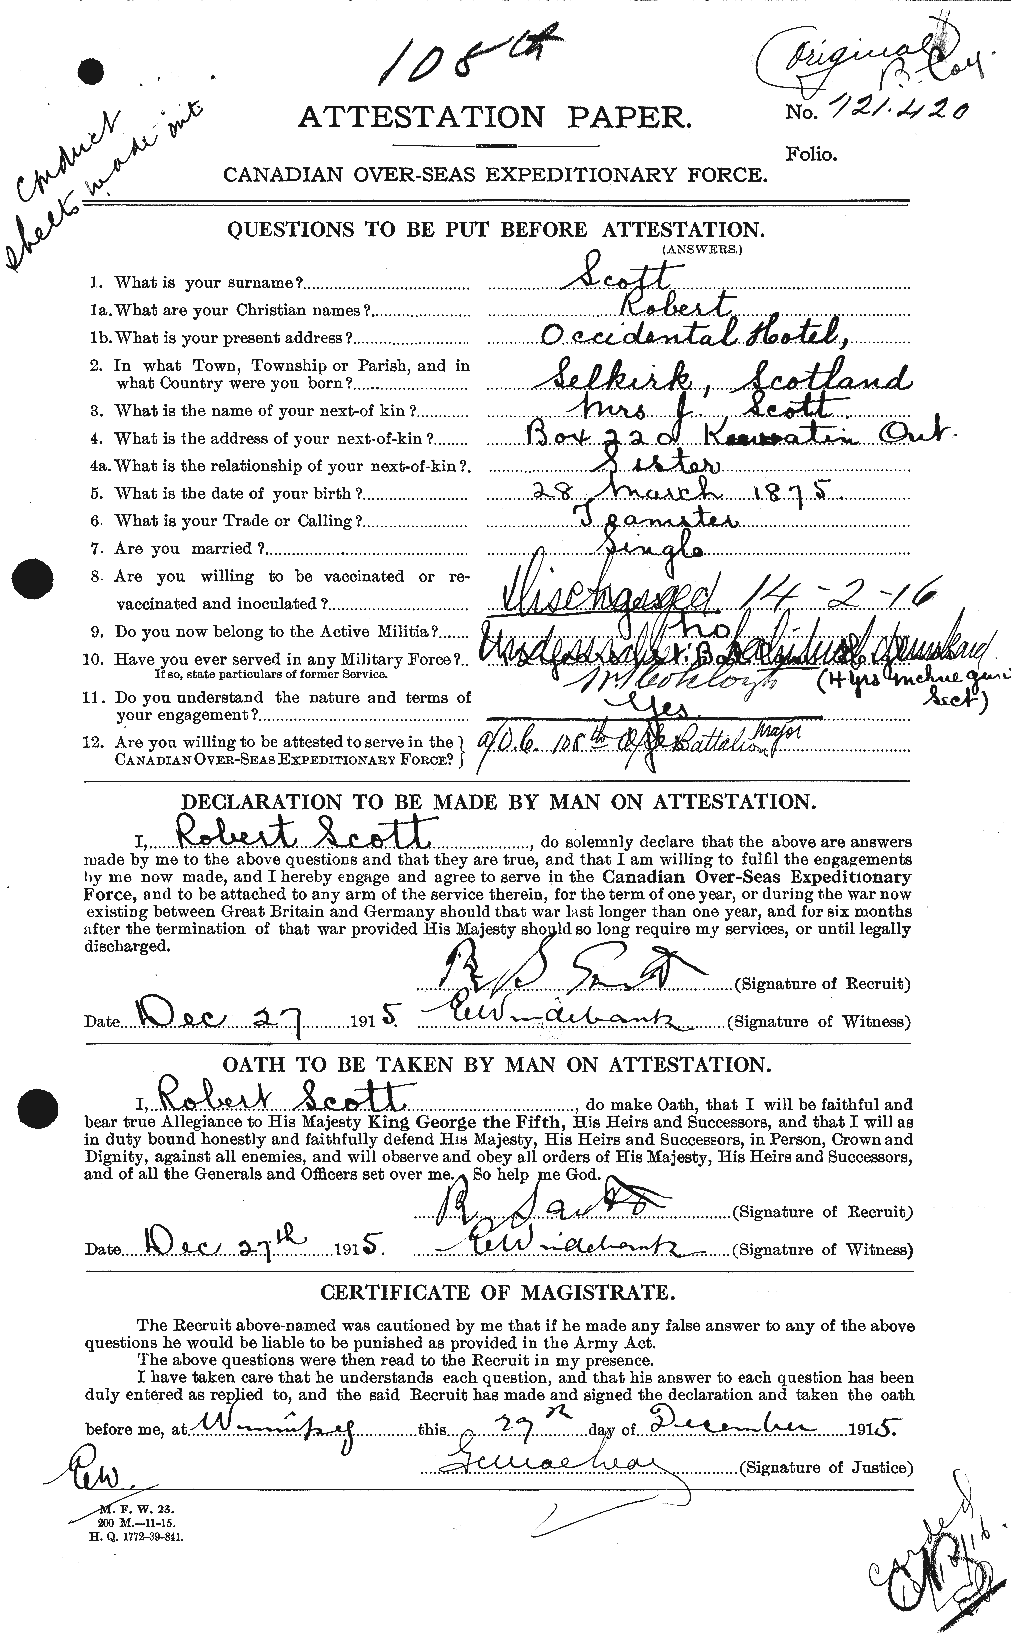 Personnel Records of the First World War - CEF 089236a